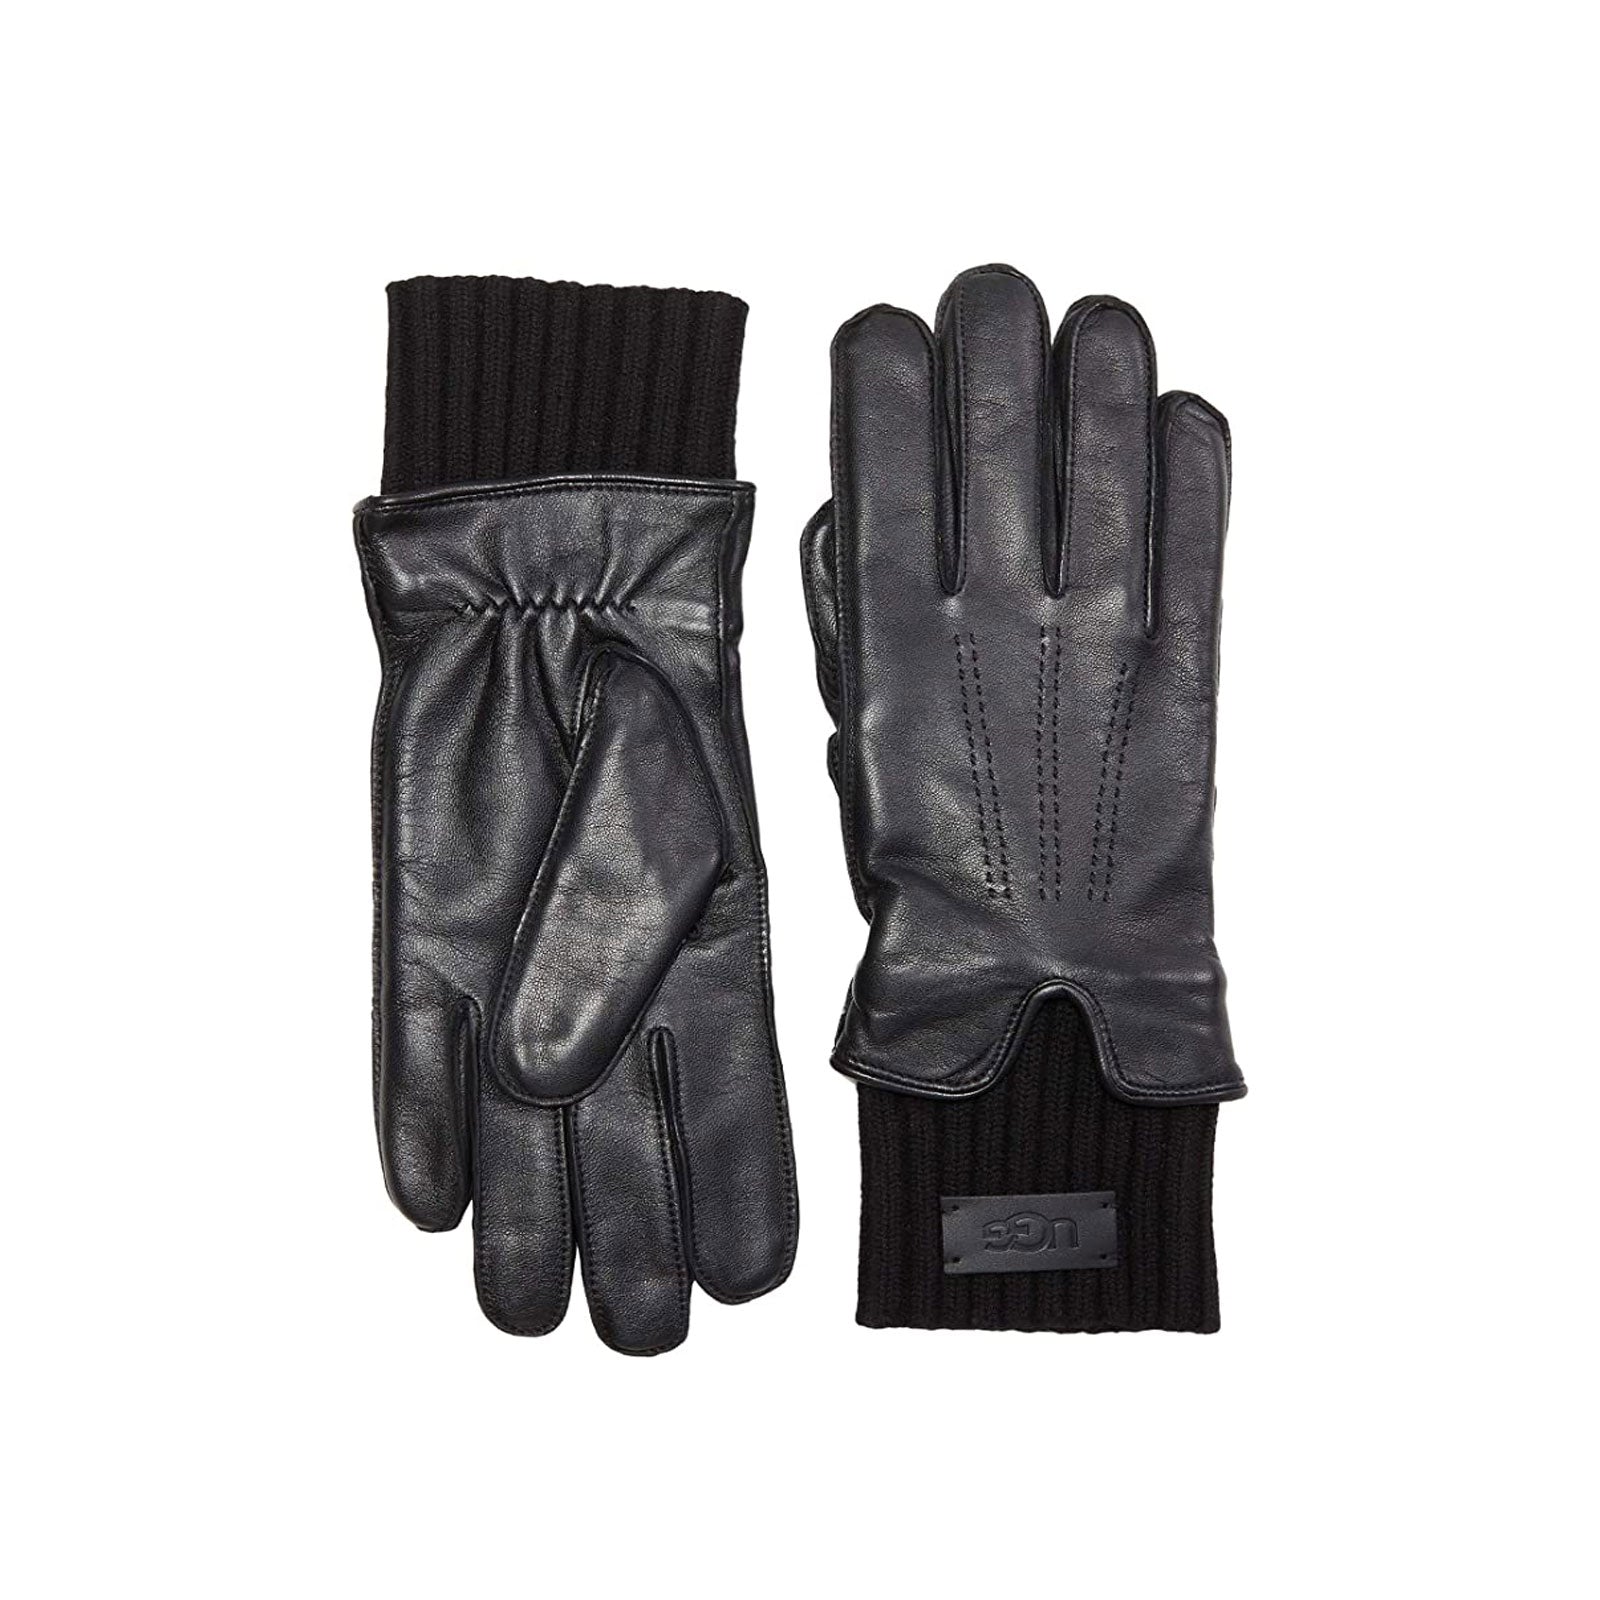 UGG Leather with Knit Cuff Glove-Black